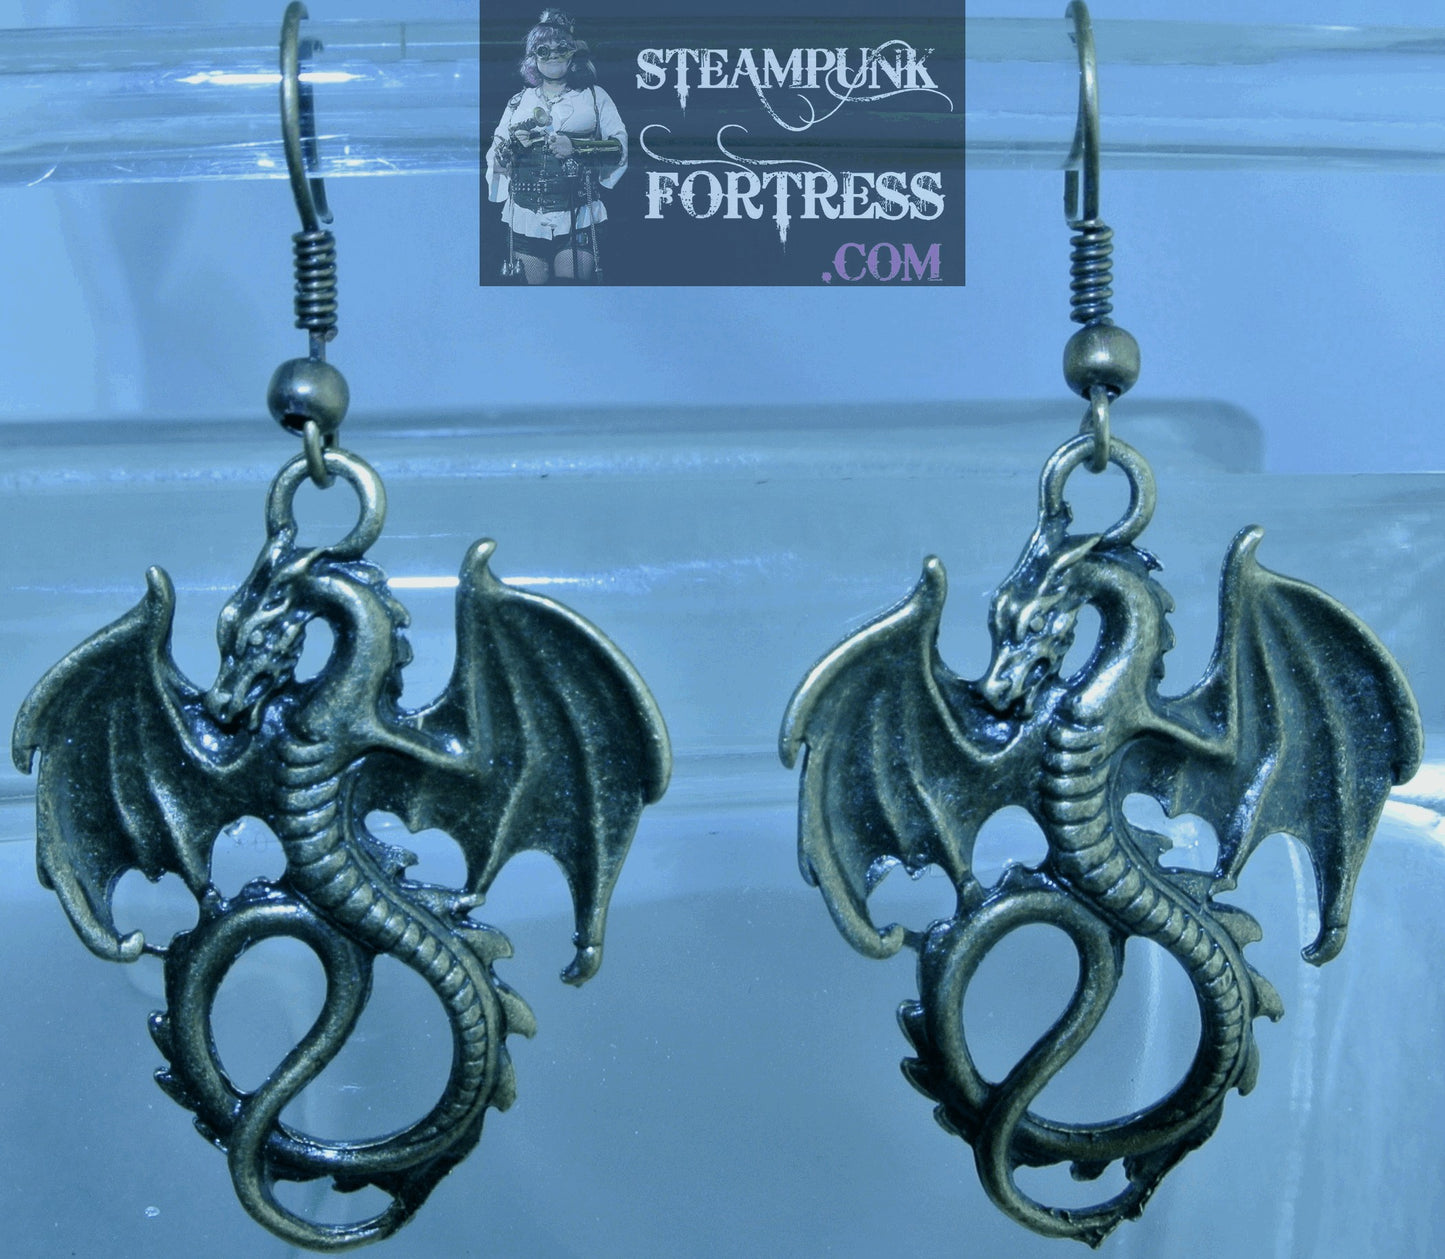 BRASS DRAGONS FLYING PIERCED EARRINGS GAME OF THRONES HOBBIT STARR WILDE STEAMPUNK FORTRESS